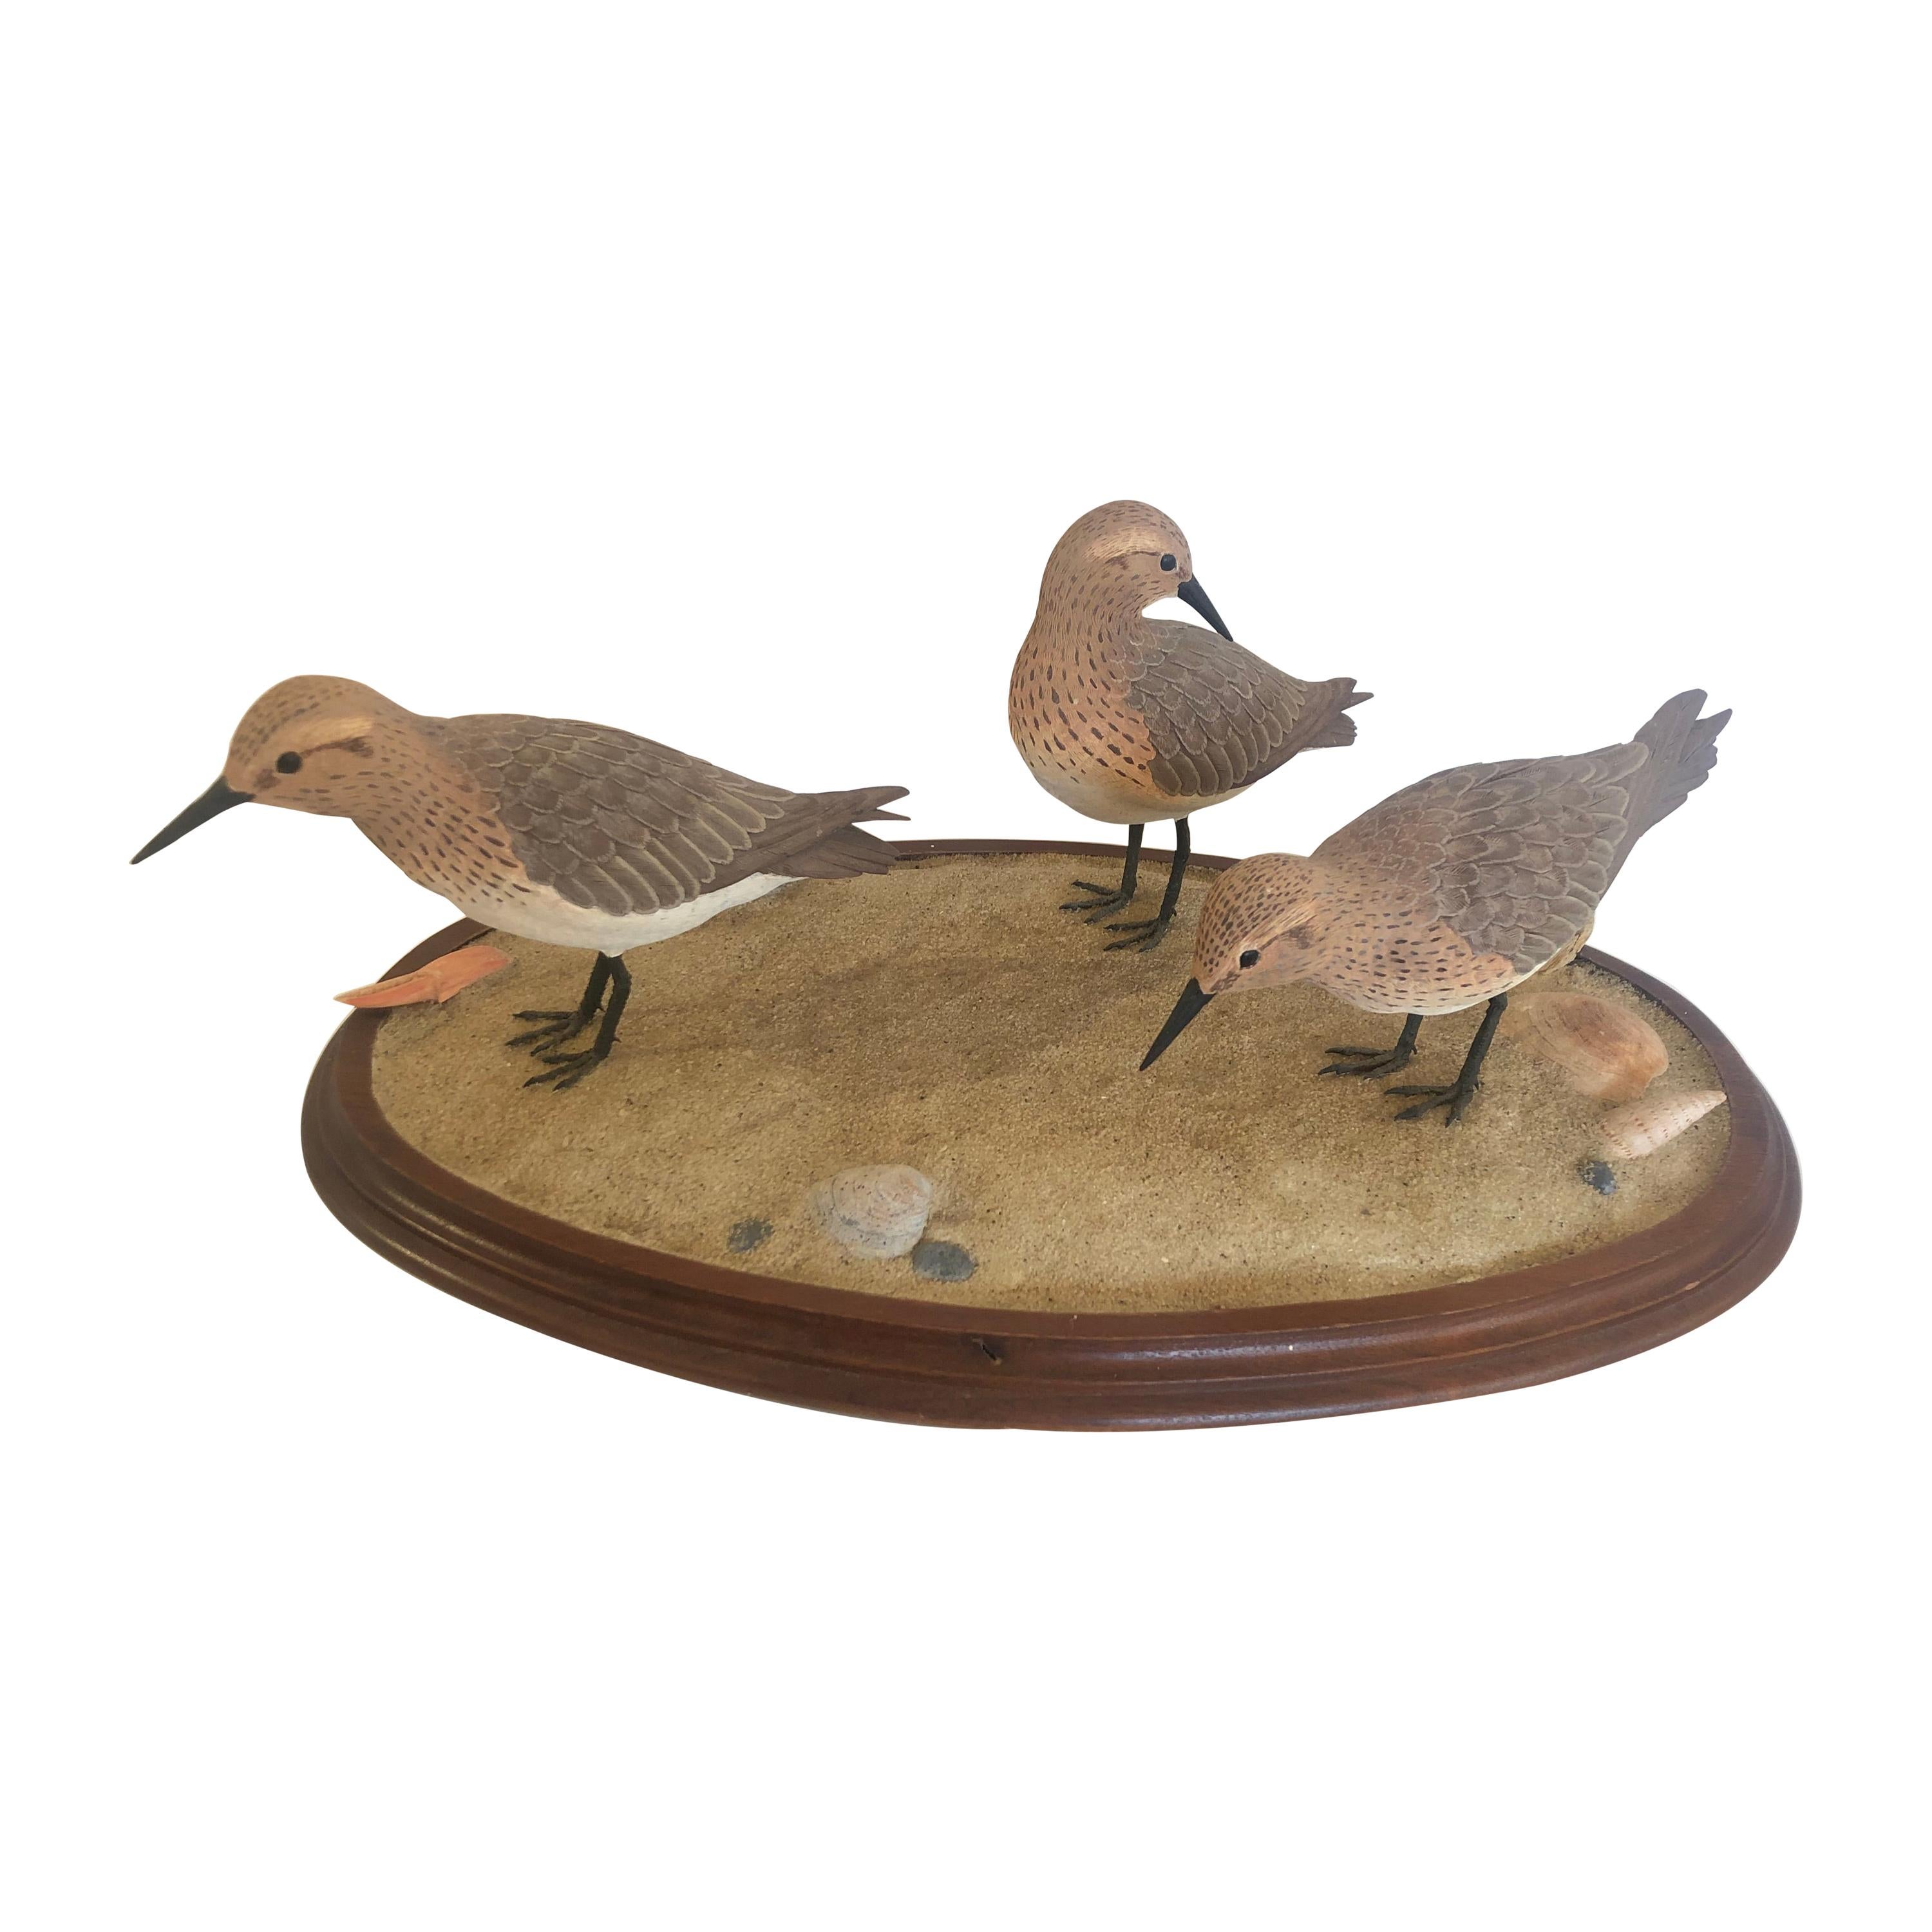 Nantucket Oval Tabletop Sculpture of Carved Wood Sandpipers on the Beach